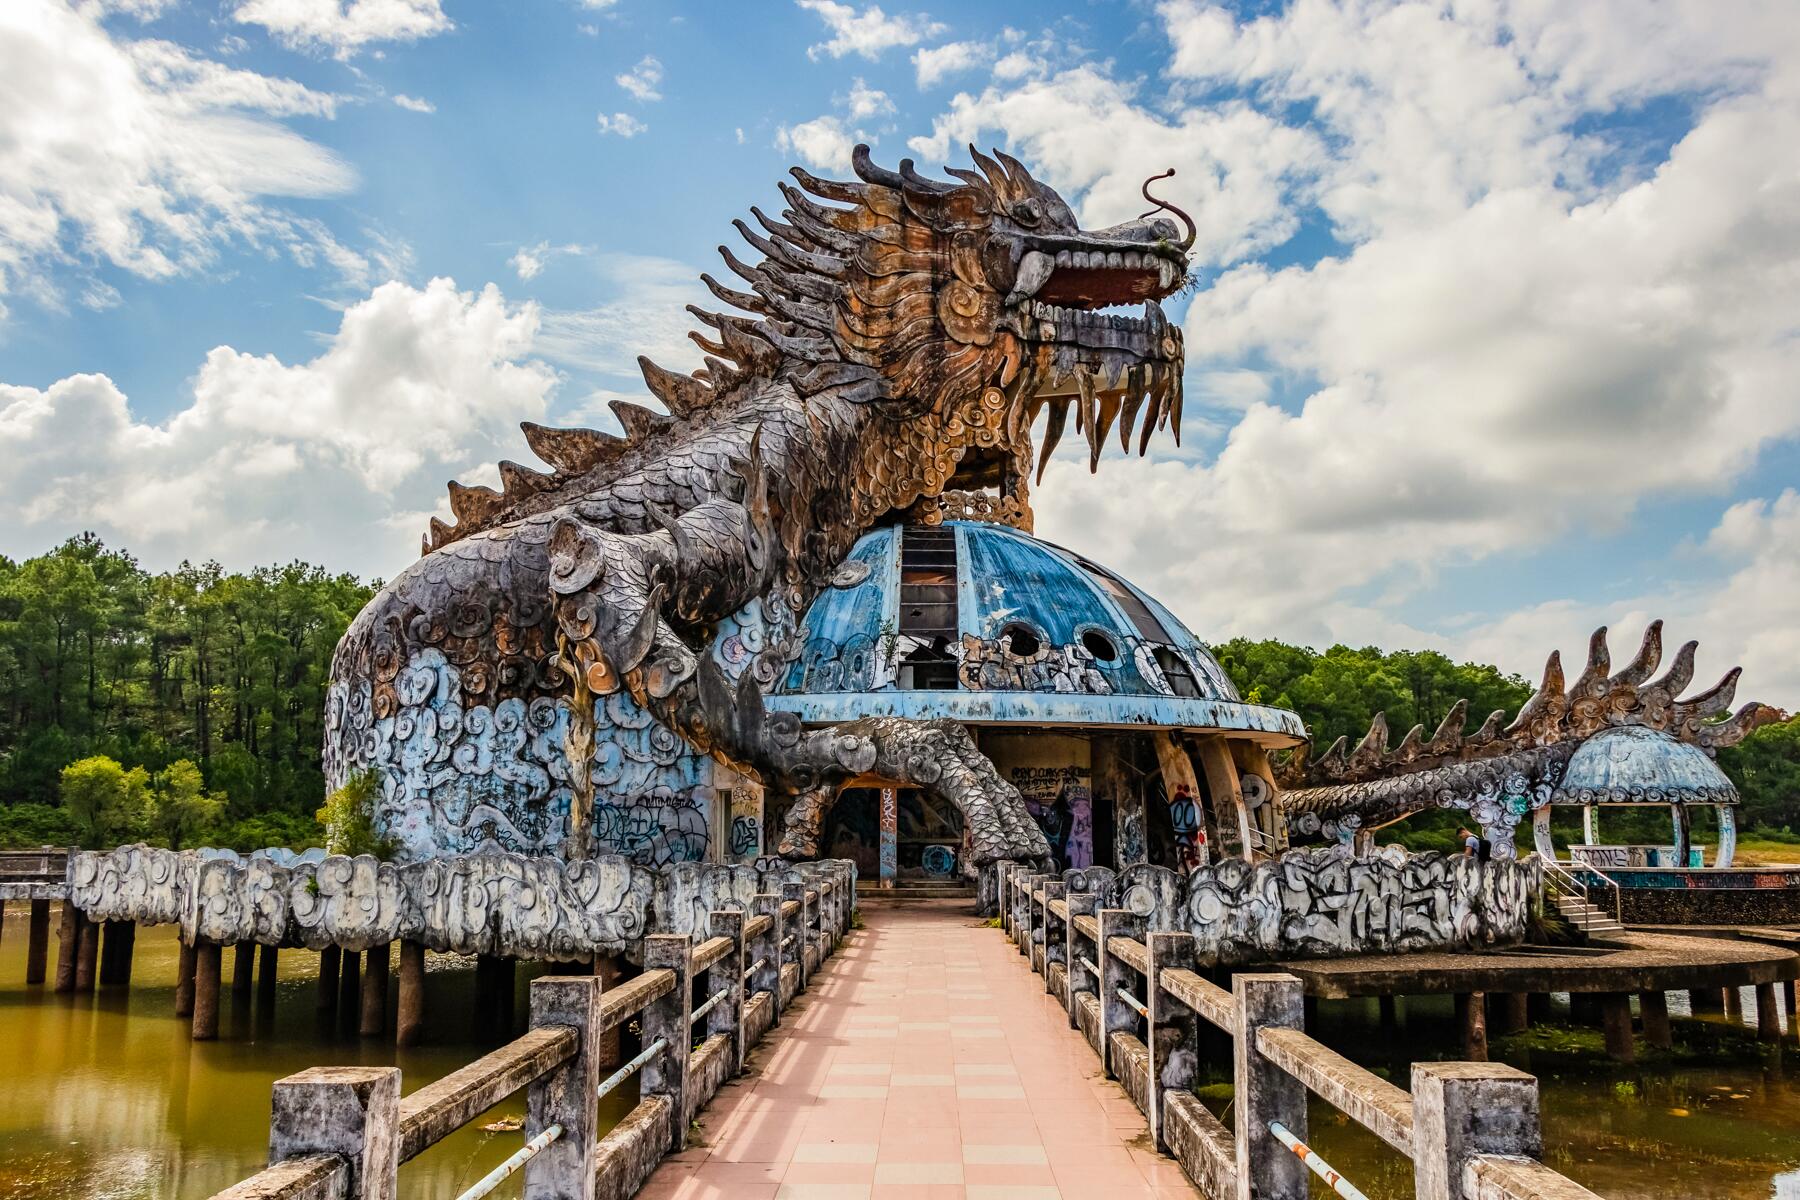 Weird Theme Parks That Are Now Closed